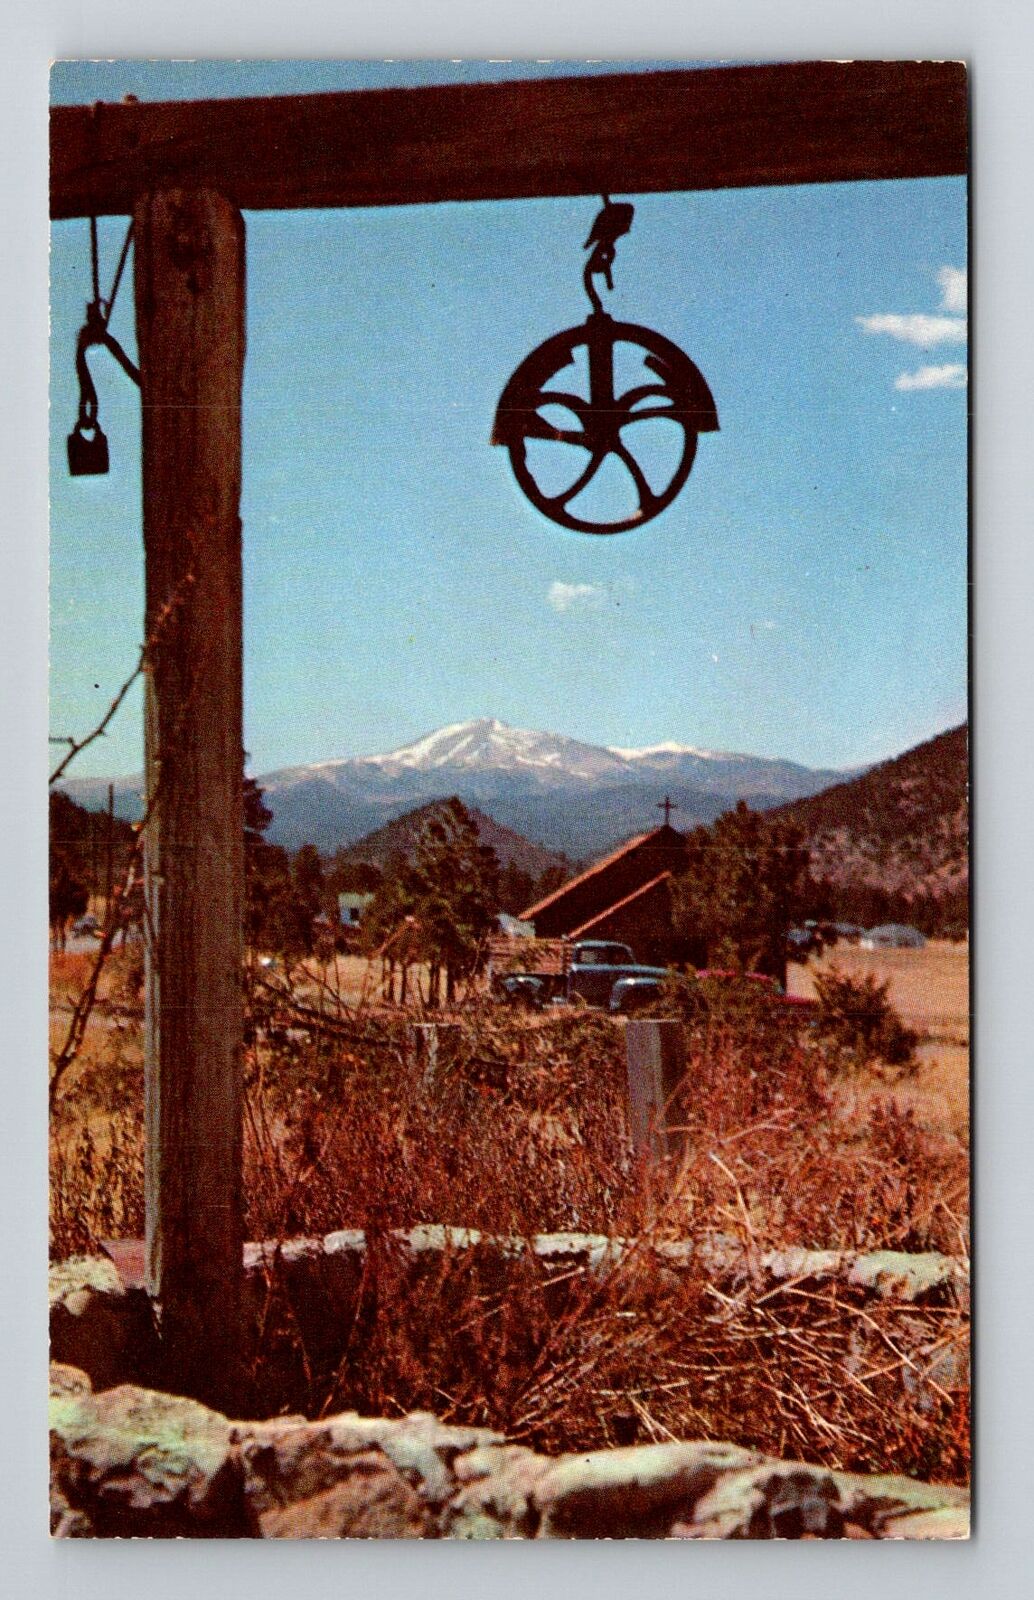 Ruidoso NM-New Mexico, An Old Well, The Little Church, Vintage Postcard